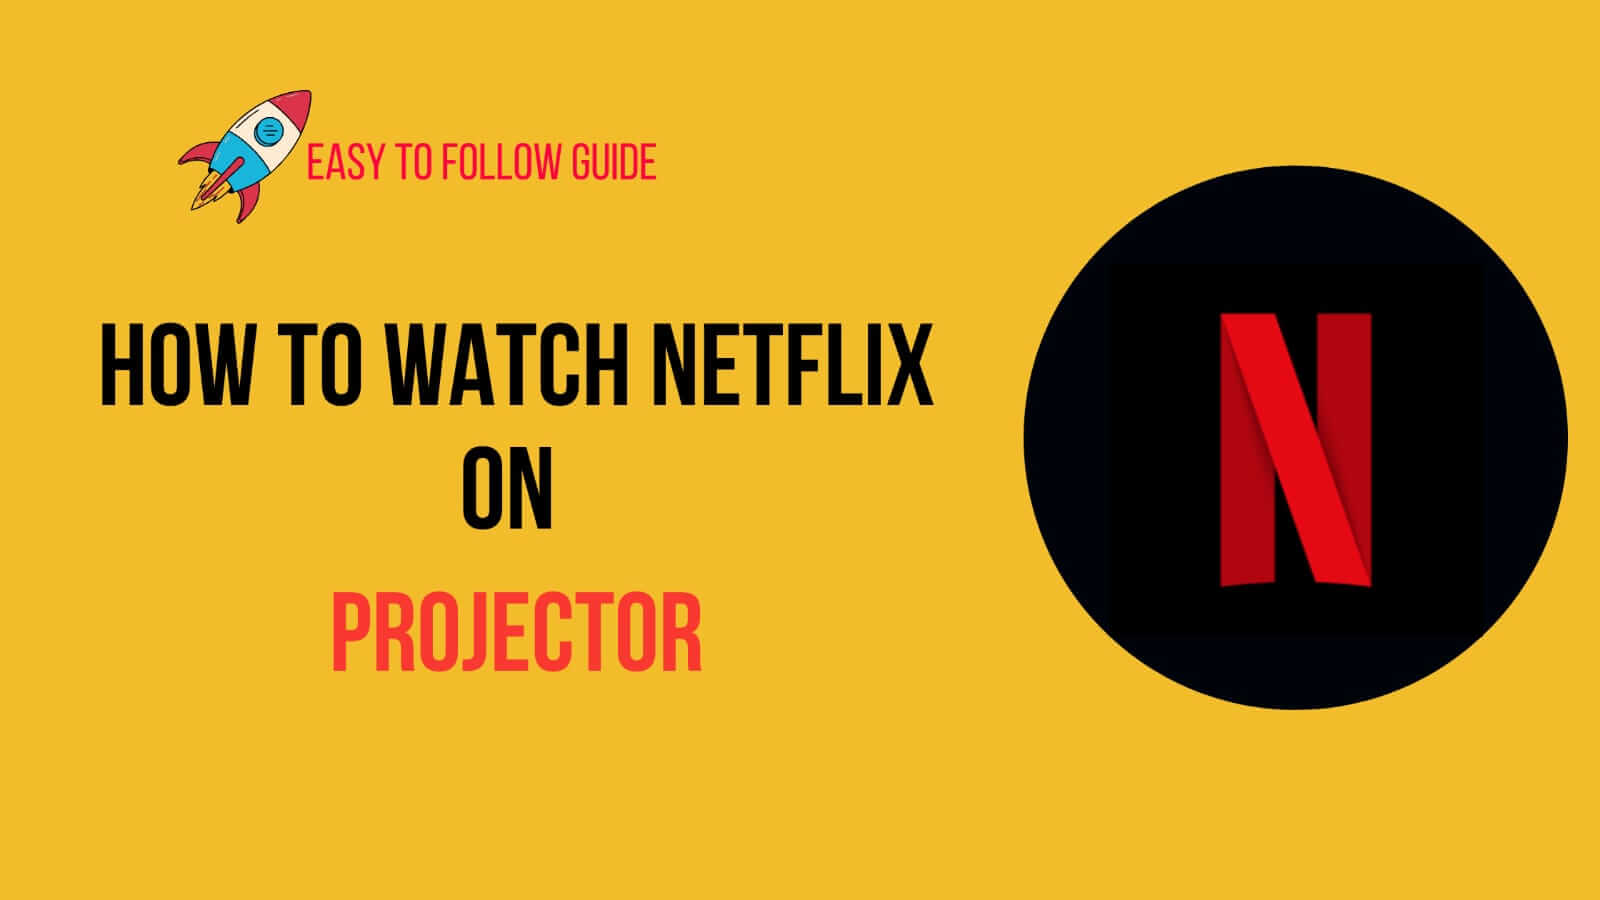 How To Watch Netflix On Projector